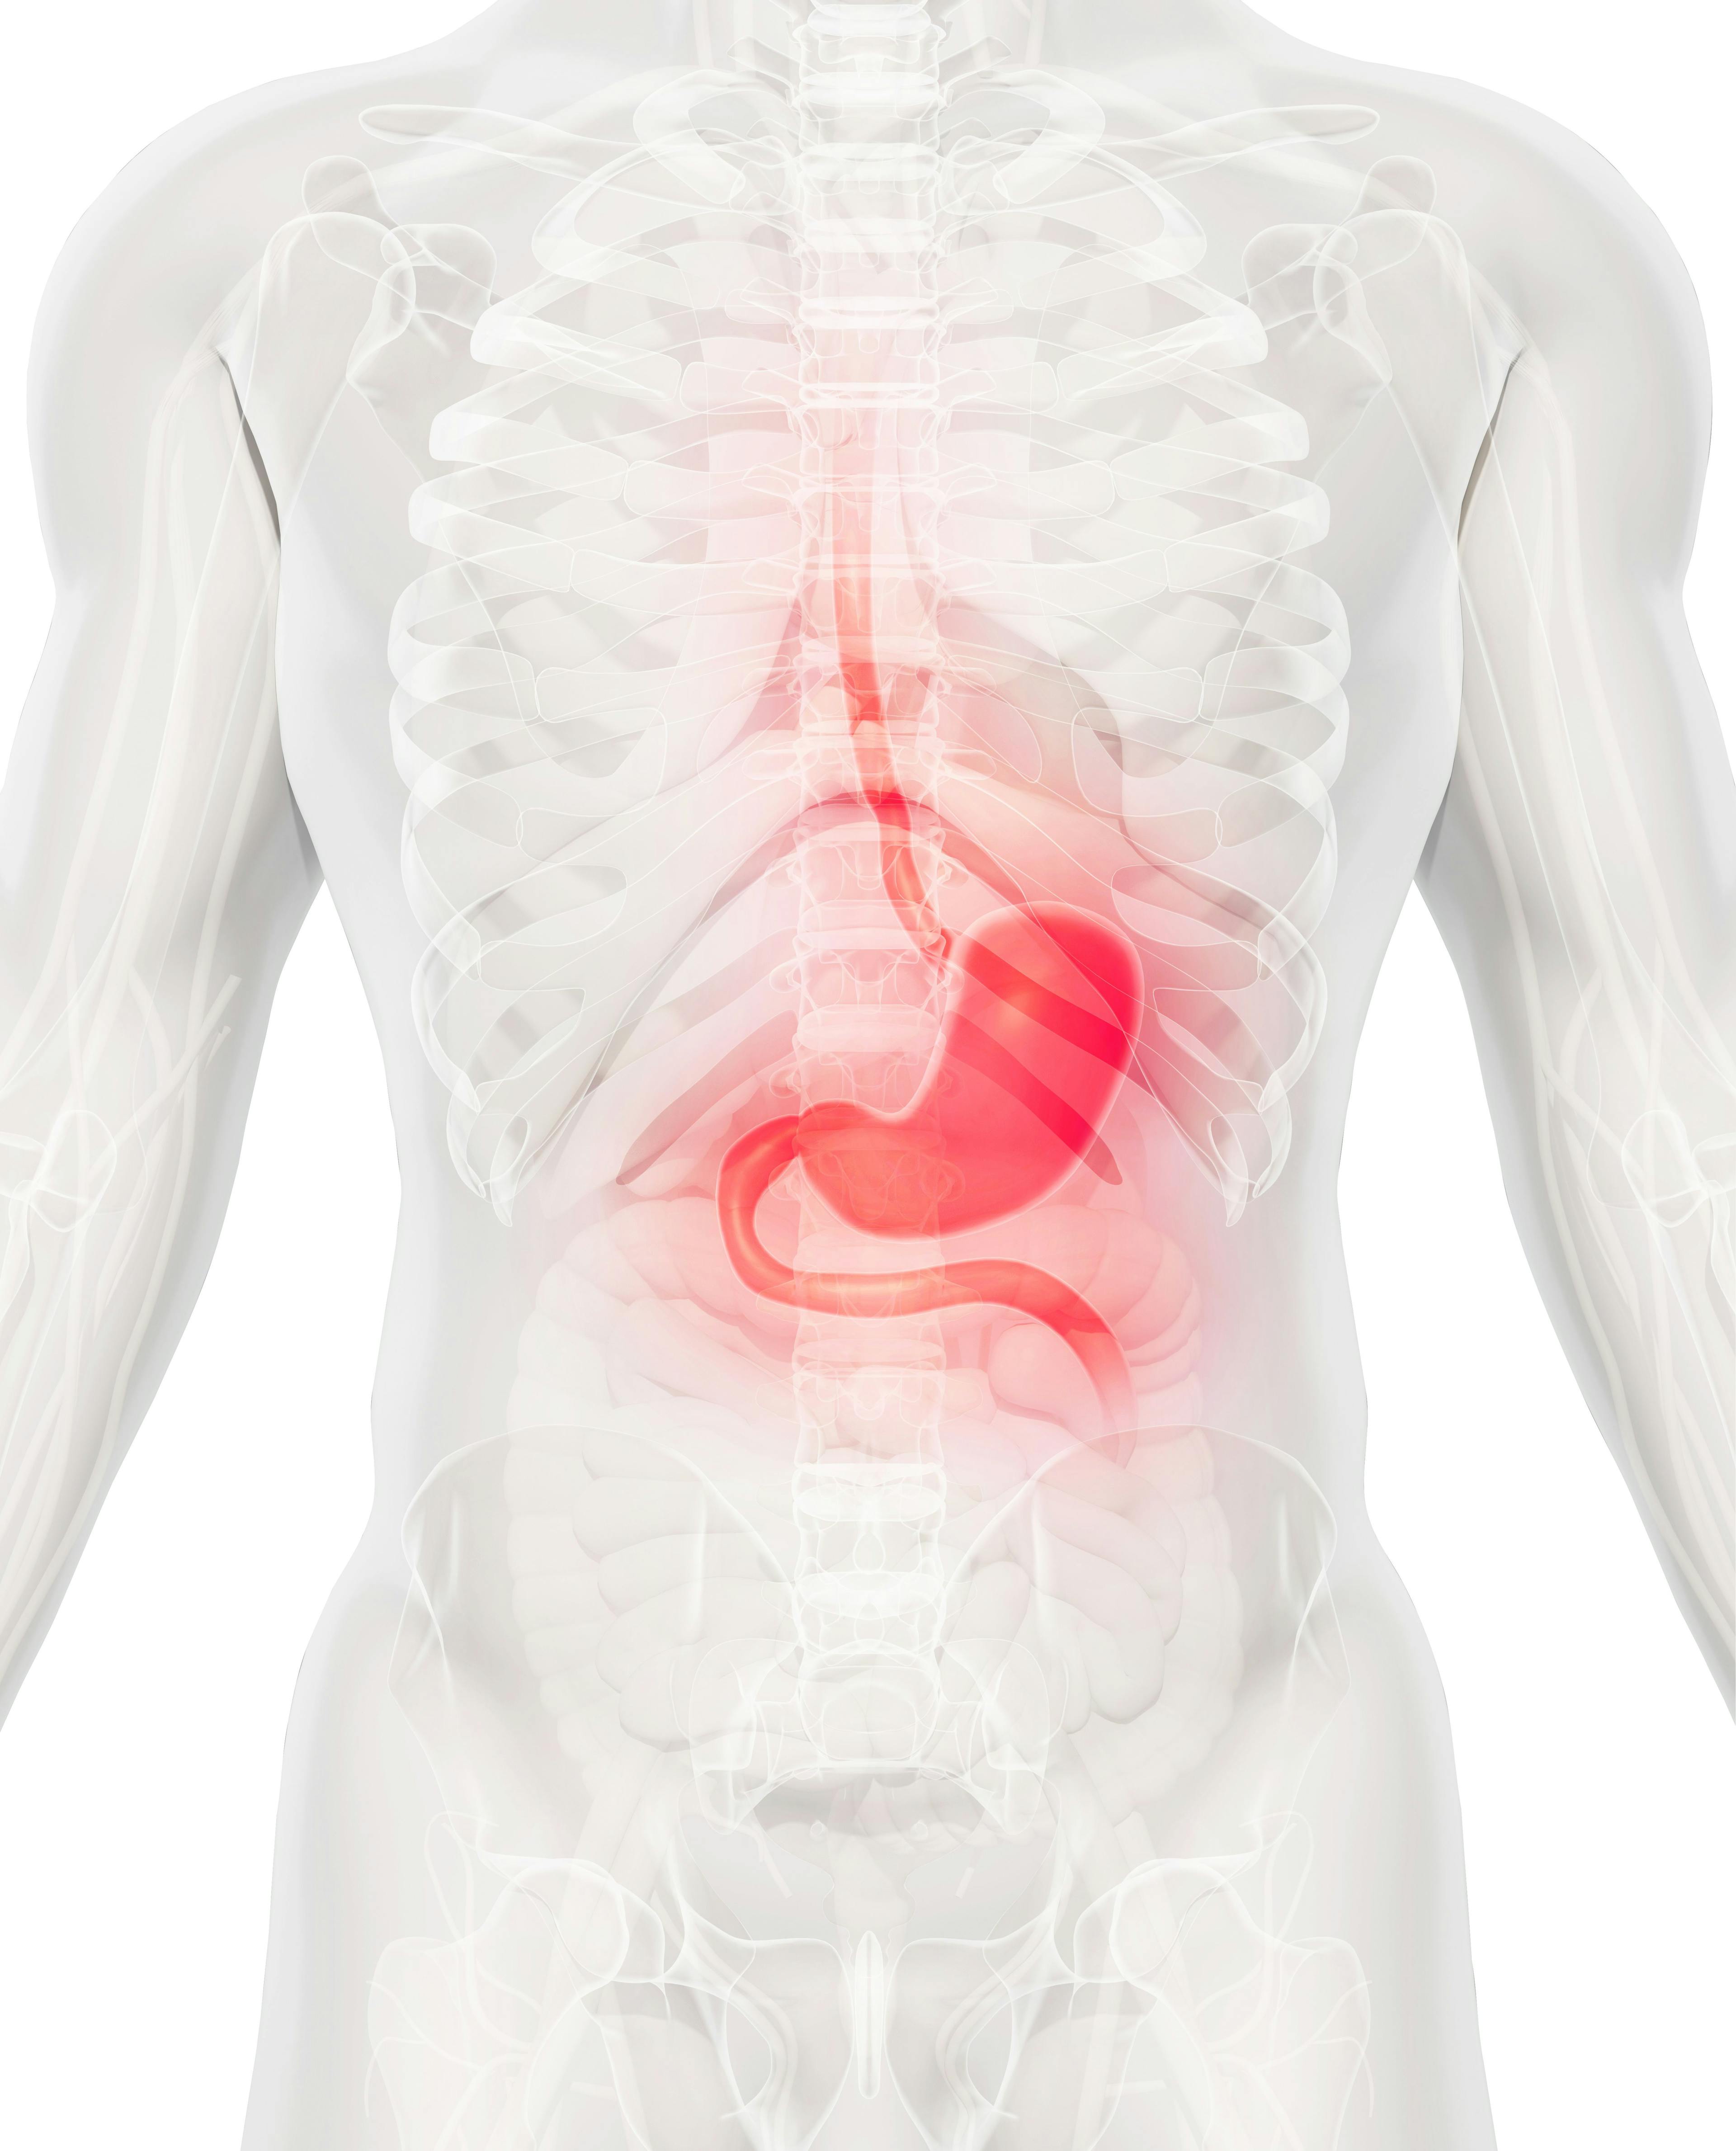 The primary end point of overall survival was met in the KEYNOTE-811 trial assessing pembrolizumab in HER2-positive gastrointestinal cancer.